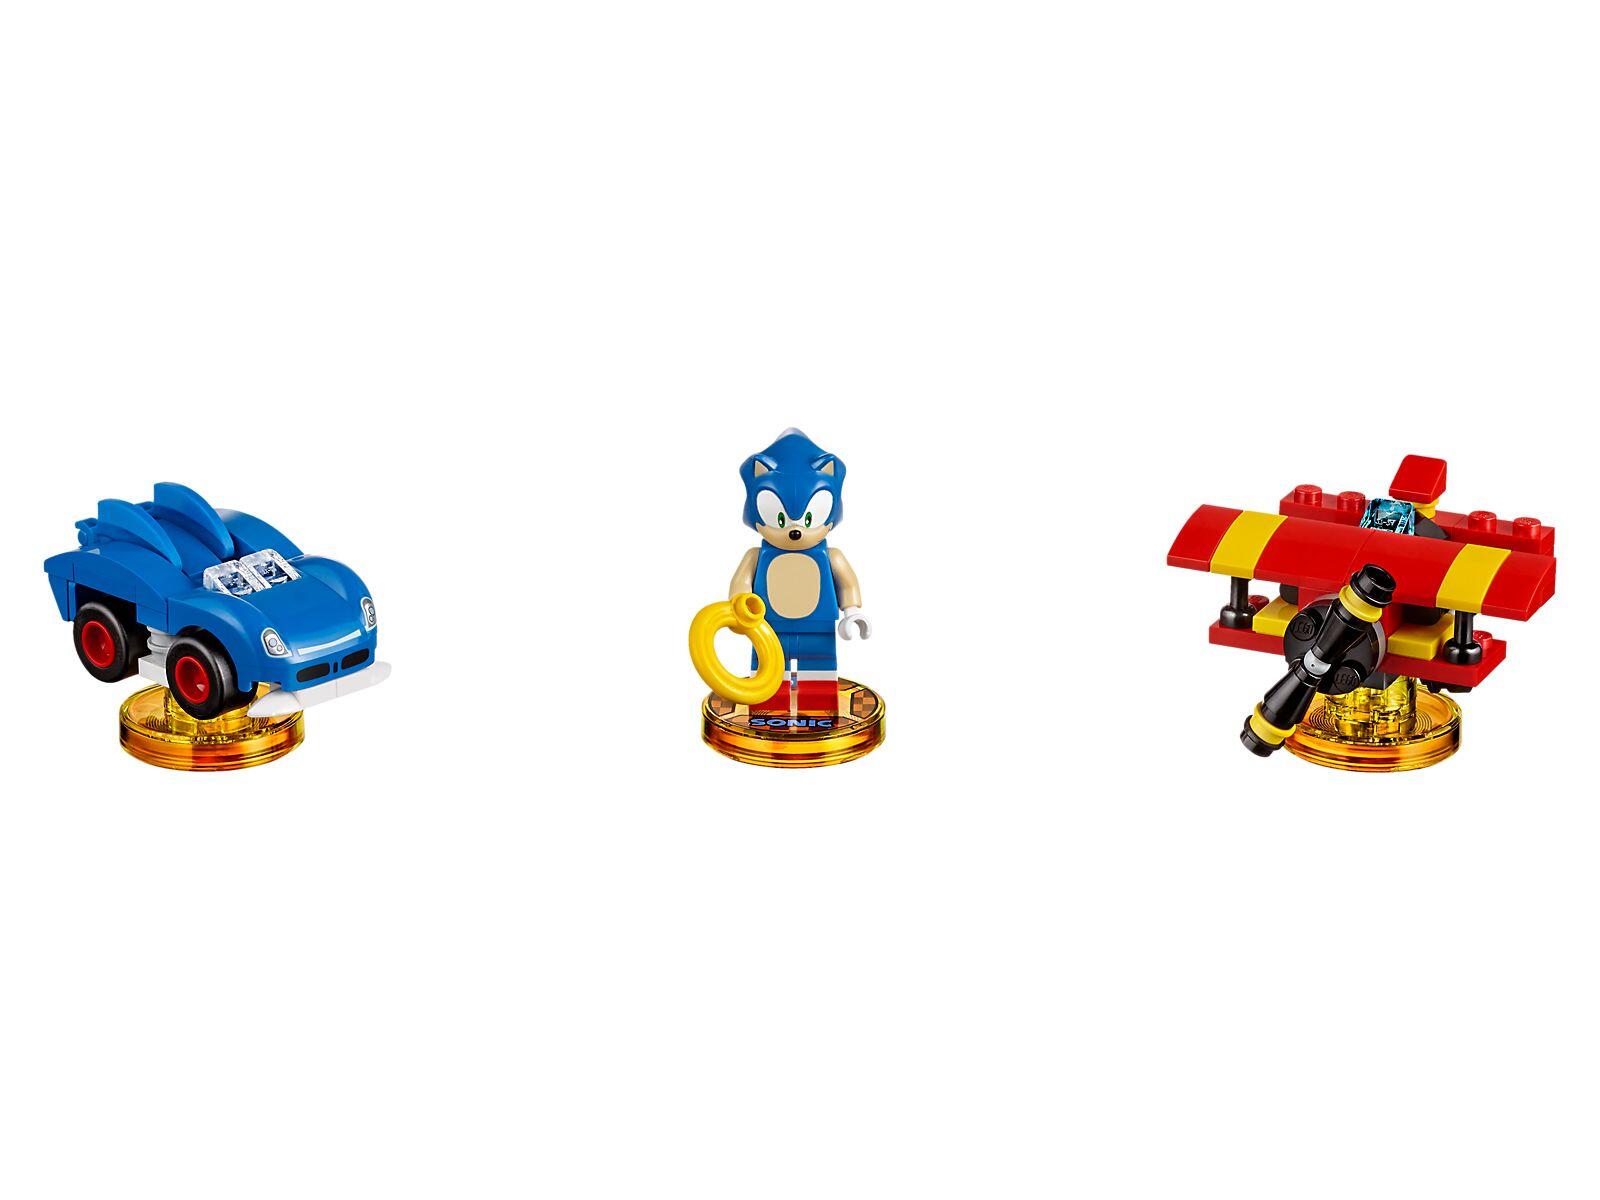 Sonic Lego Dimensions Facts and Stuff.